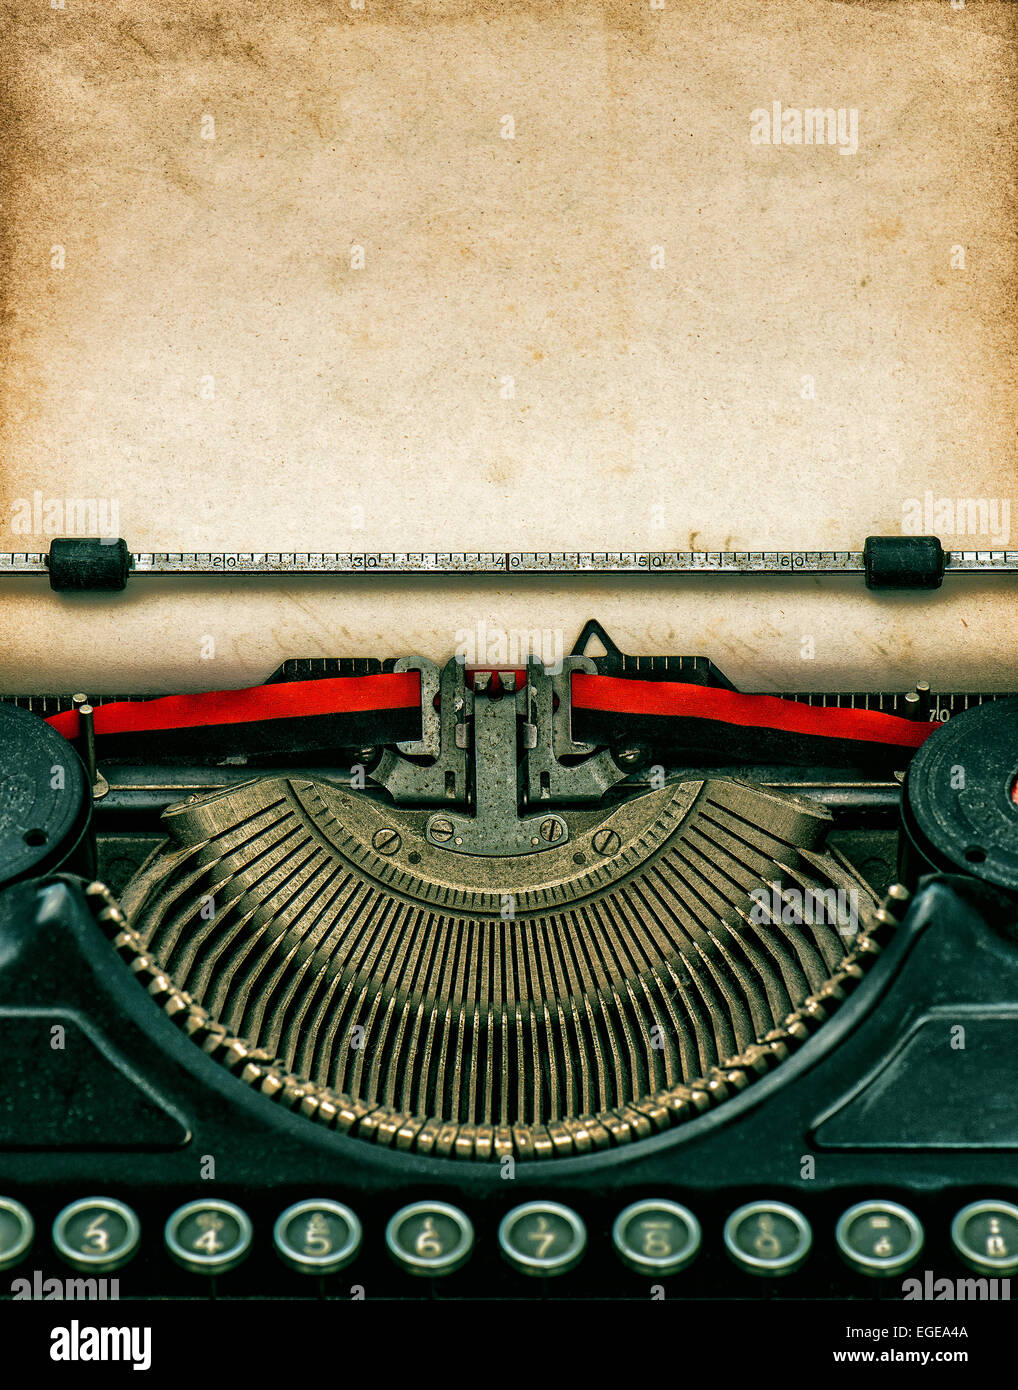 Vintage typewriter with aged textured grungy paper Stock Photo